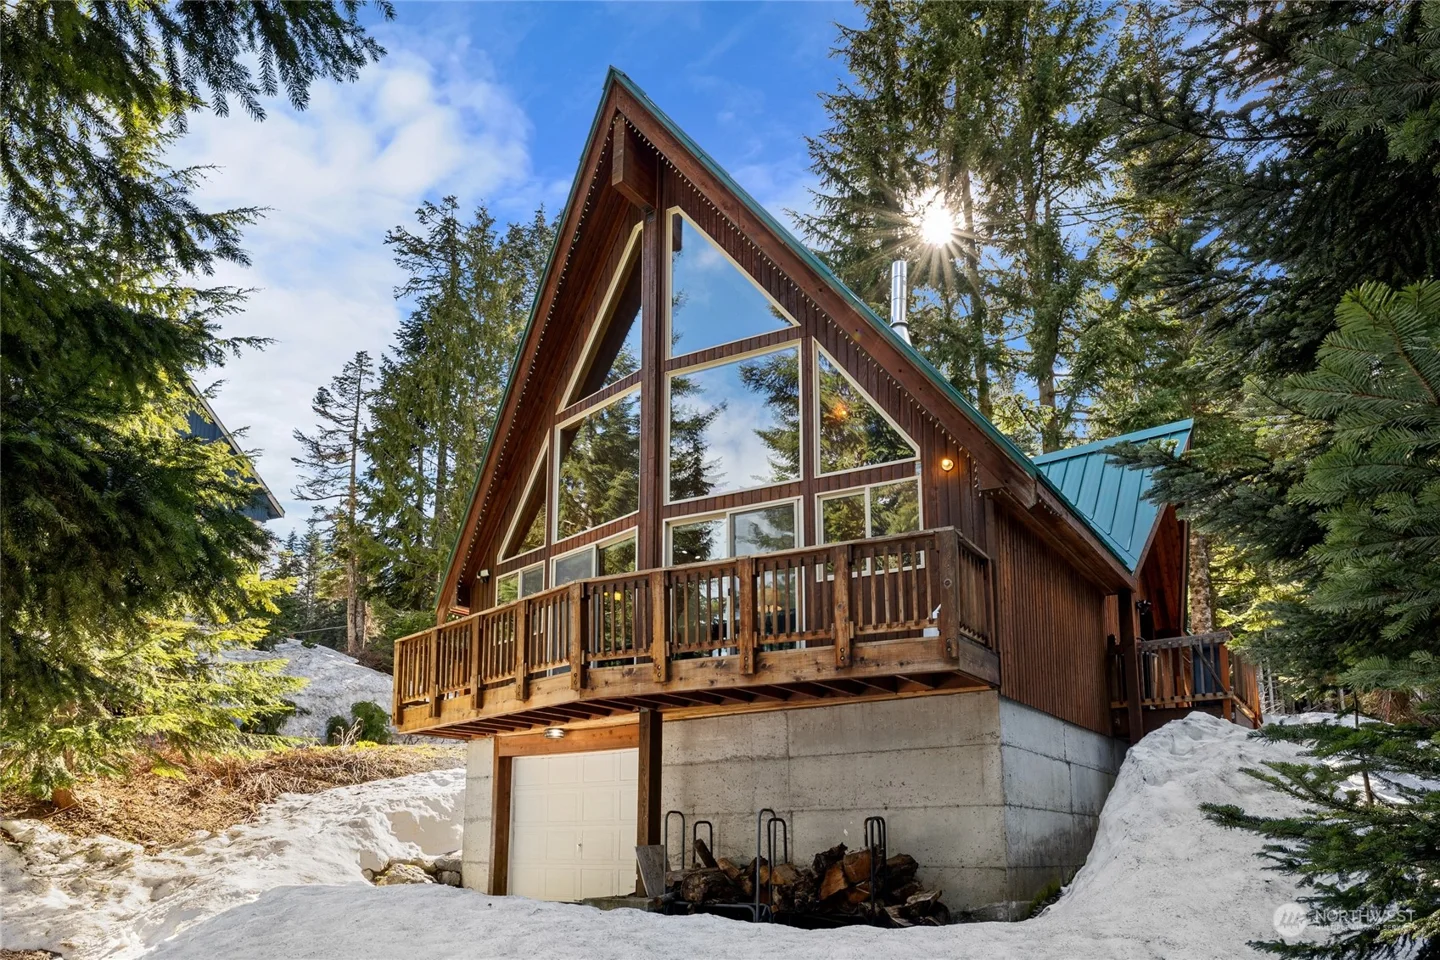 Mountain retreat in the slopes of Snoqualmie Pass